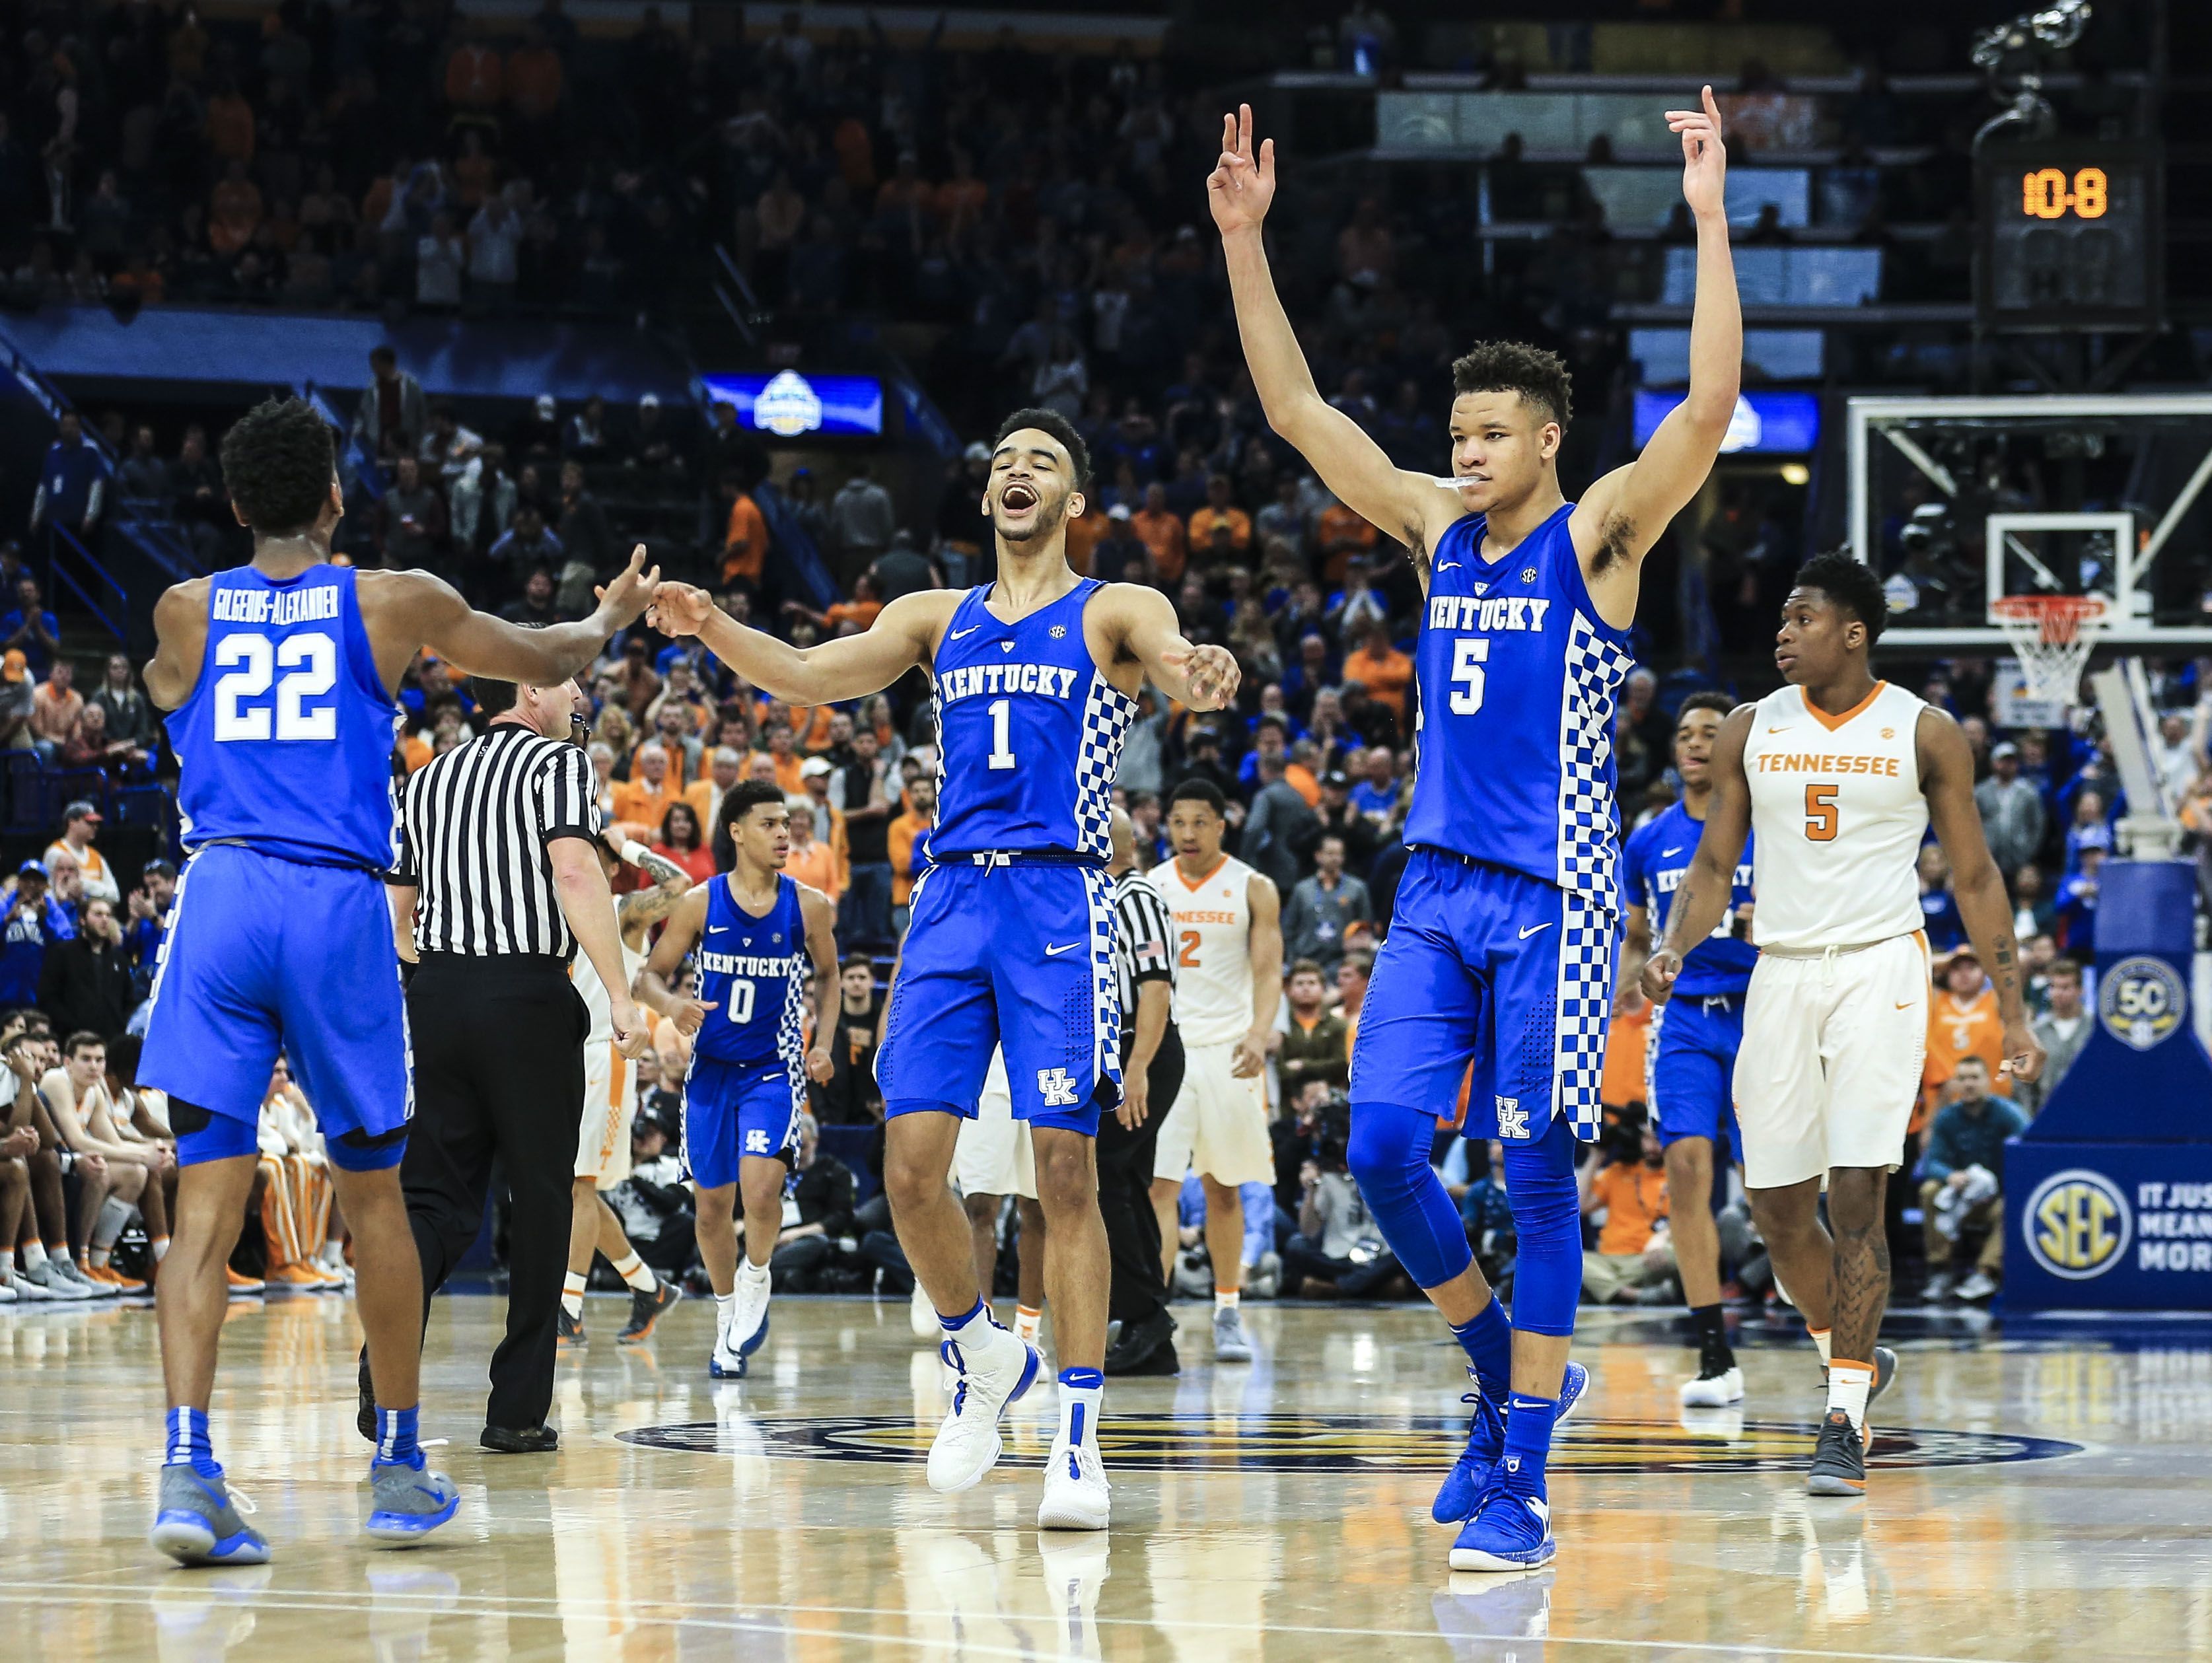 Kentucky basketball will play Davidson in the NCAA Tournament South region USA TODAY Sports